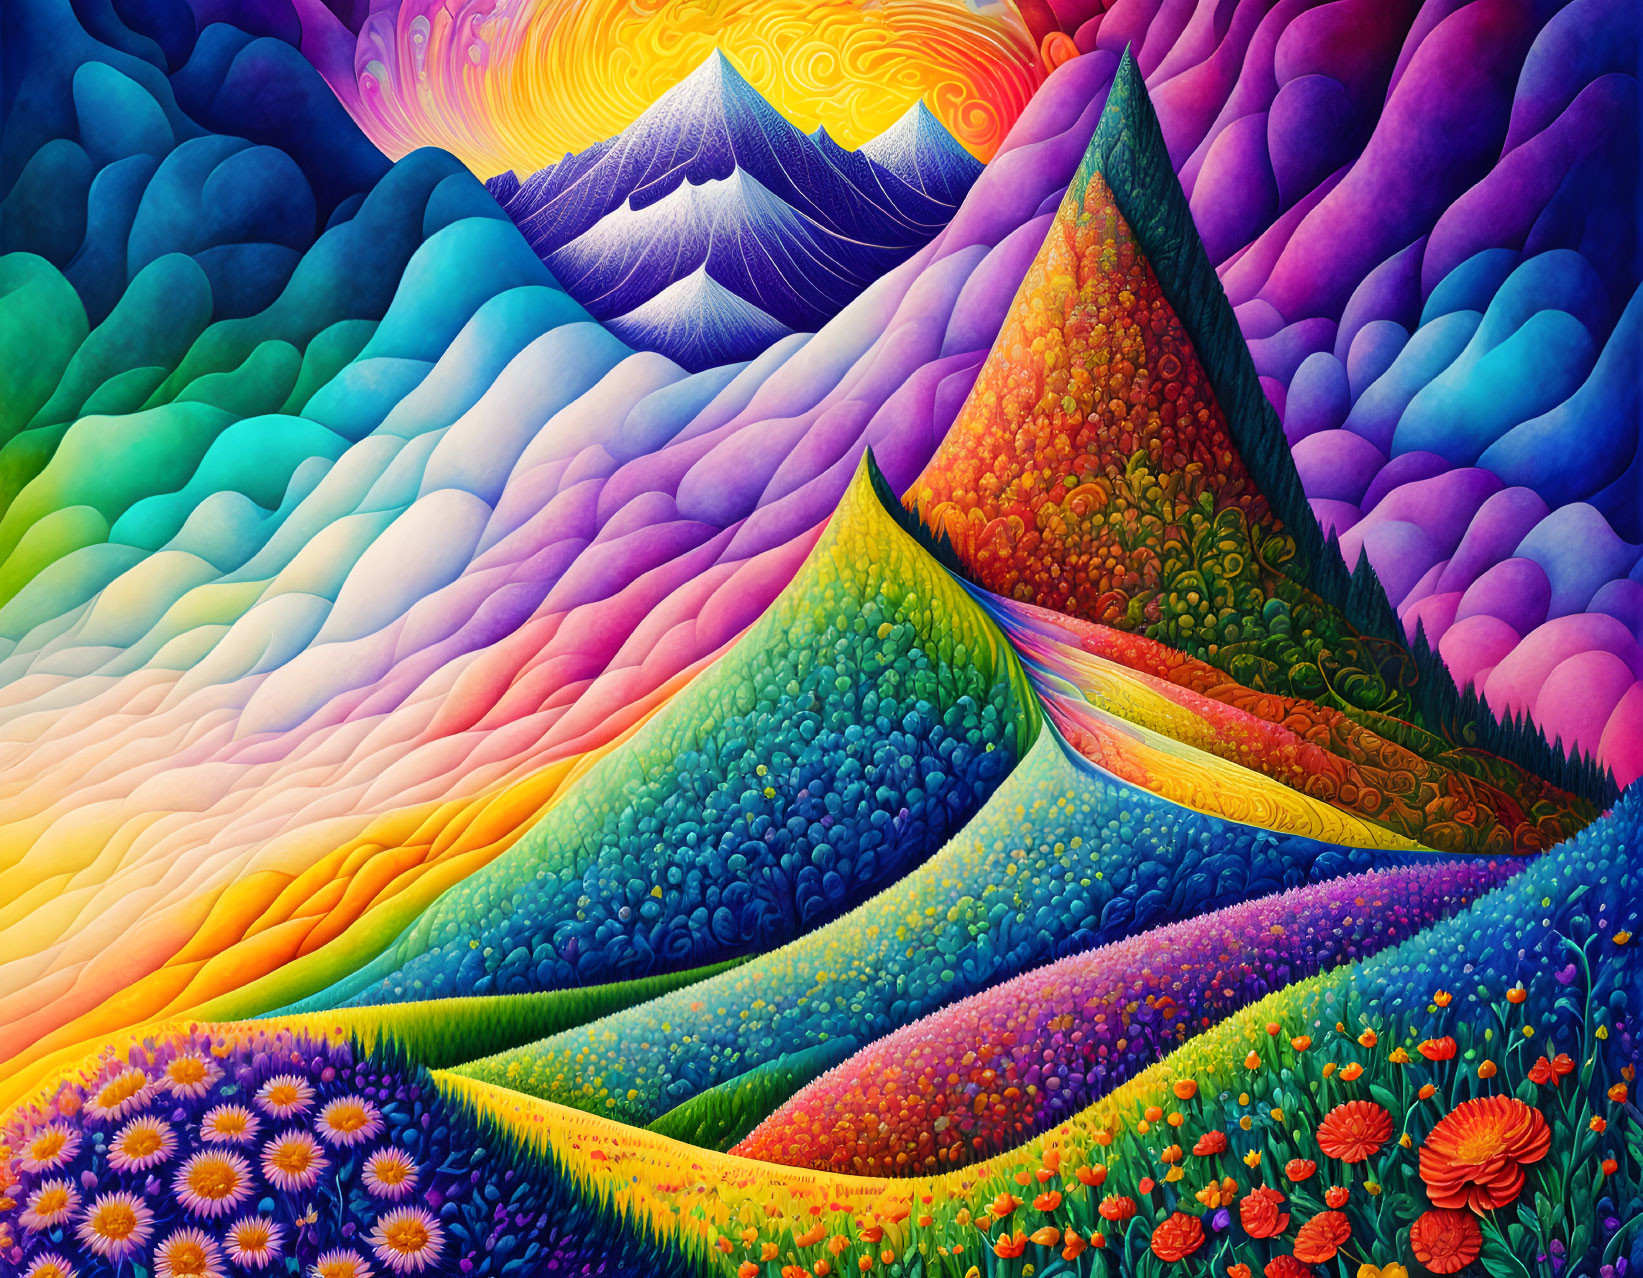 Colorful Landscape Artwork with Rolling Hills and Mountains